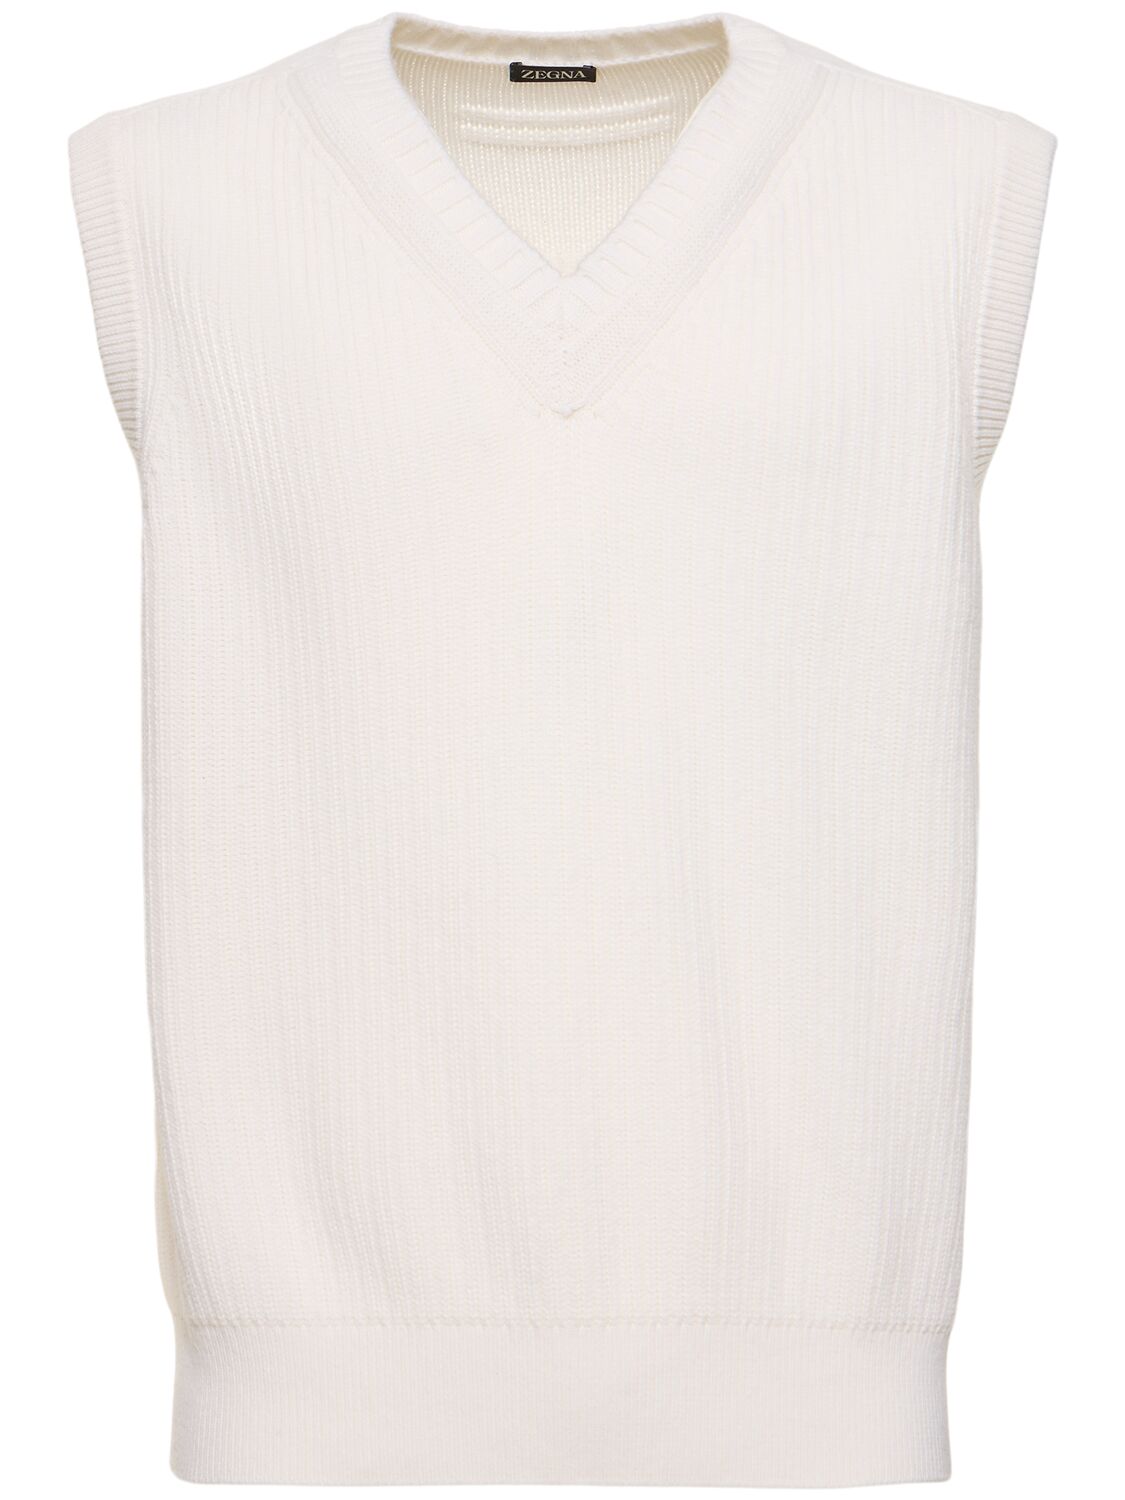 Zegna Ribbed Cashmere & Cotton Knit Waistcoat In White